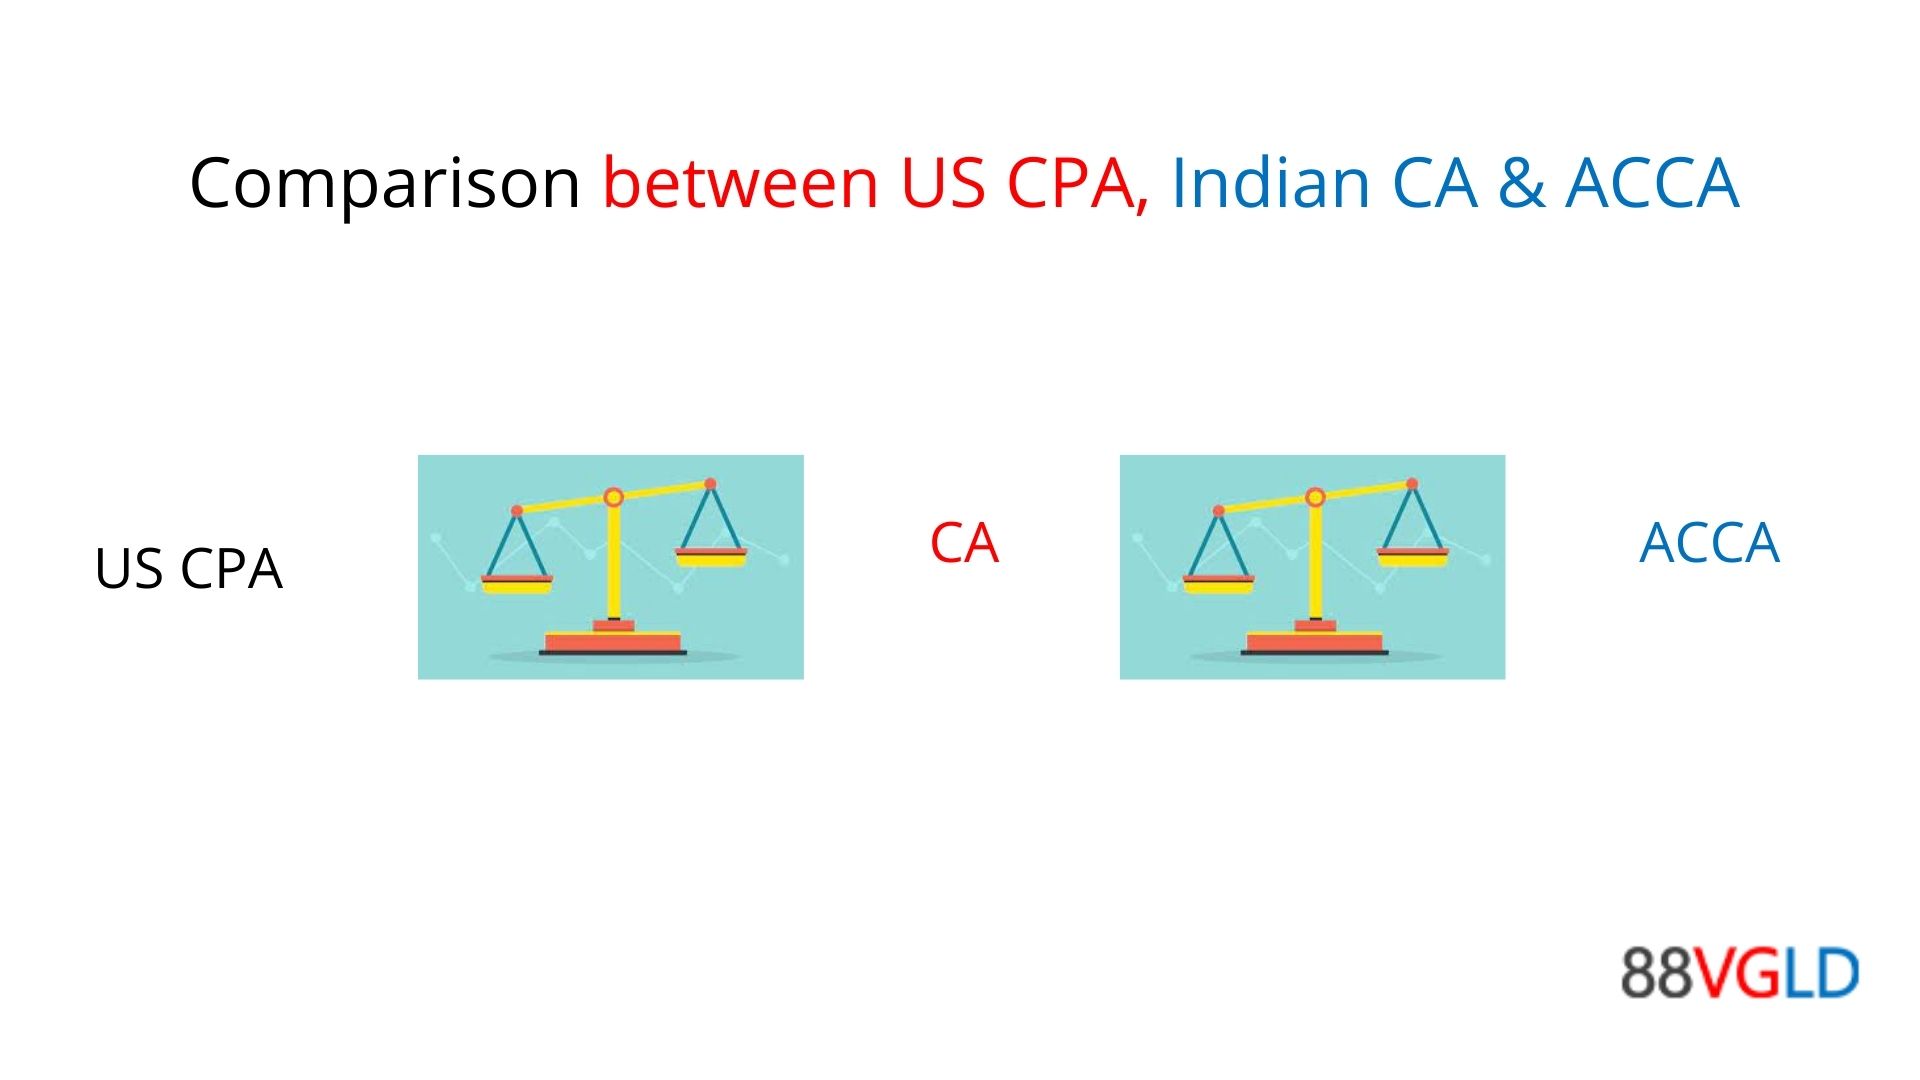 Comparison between US CPA, Indian CA & ACCA